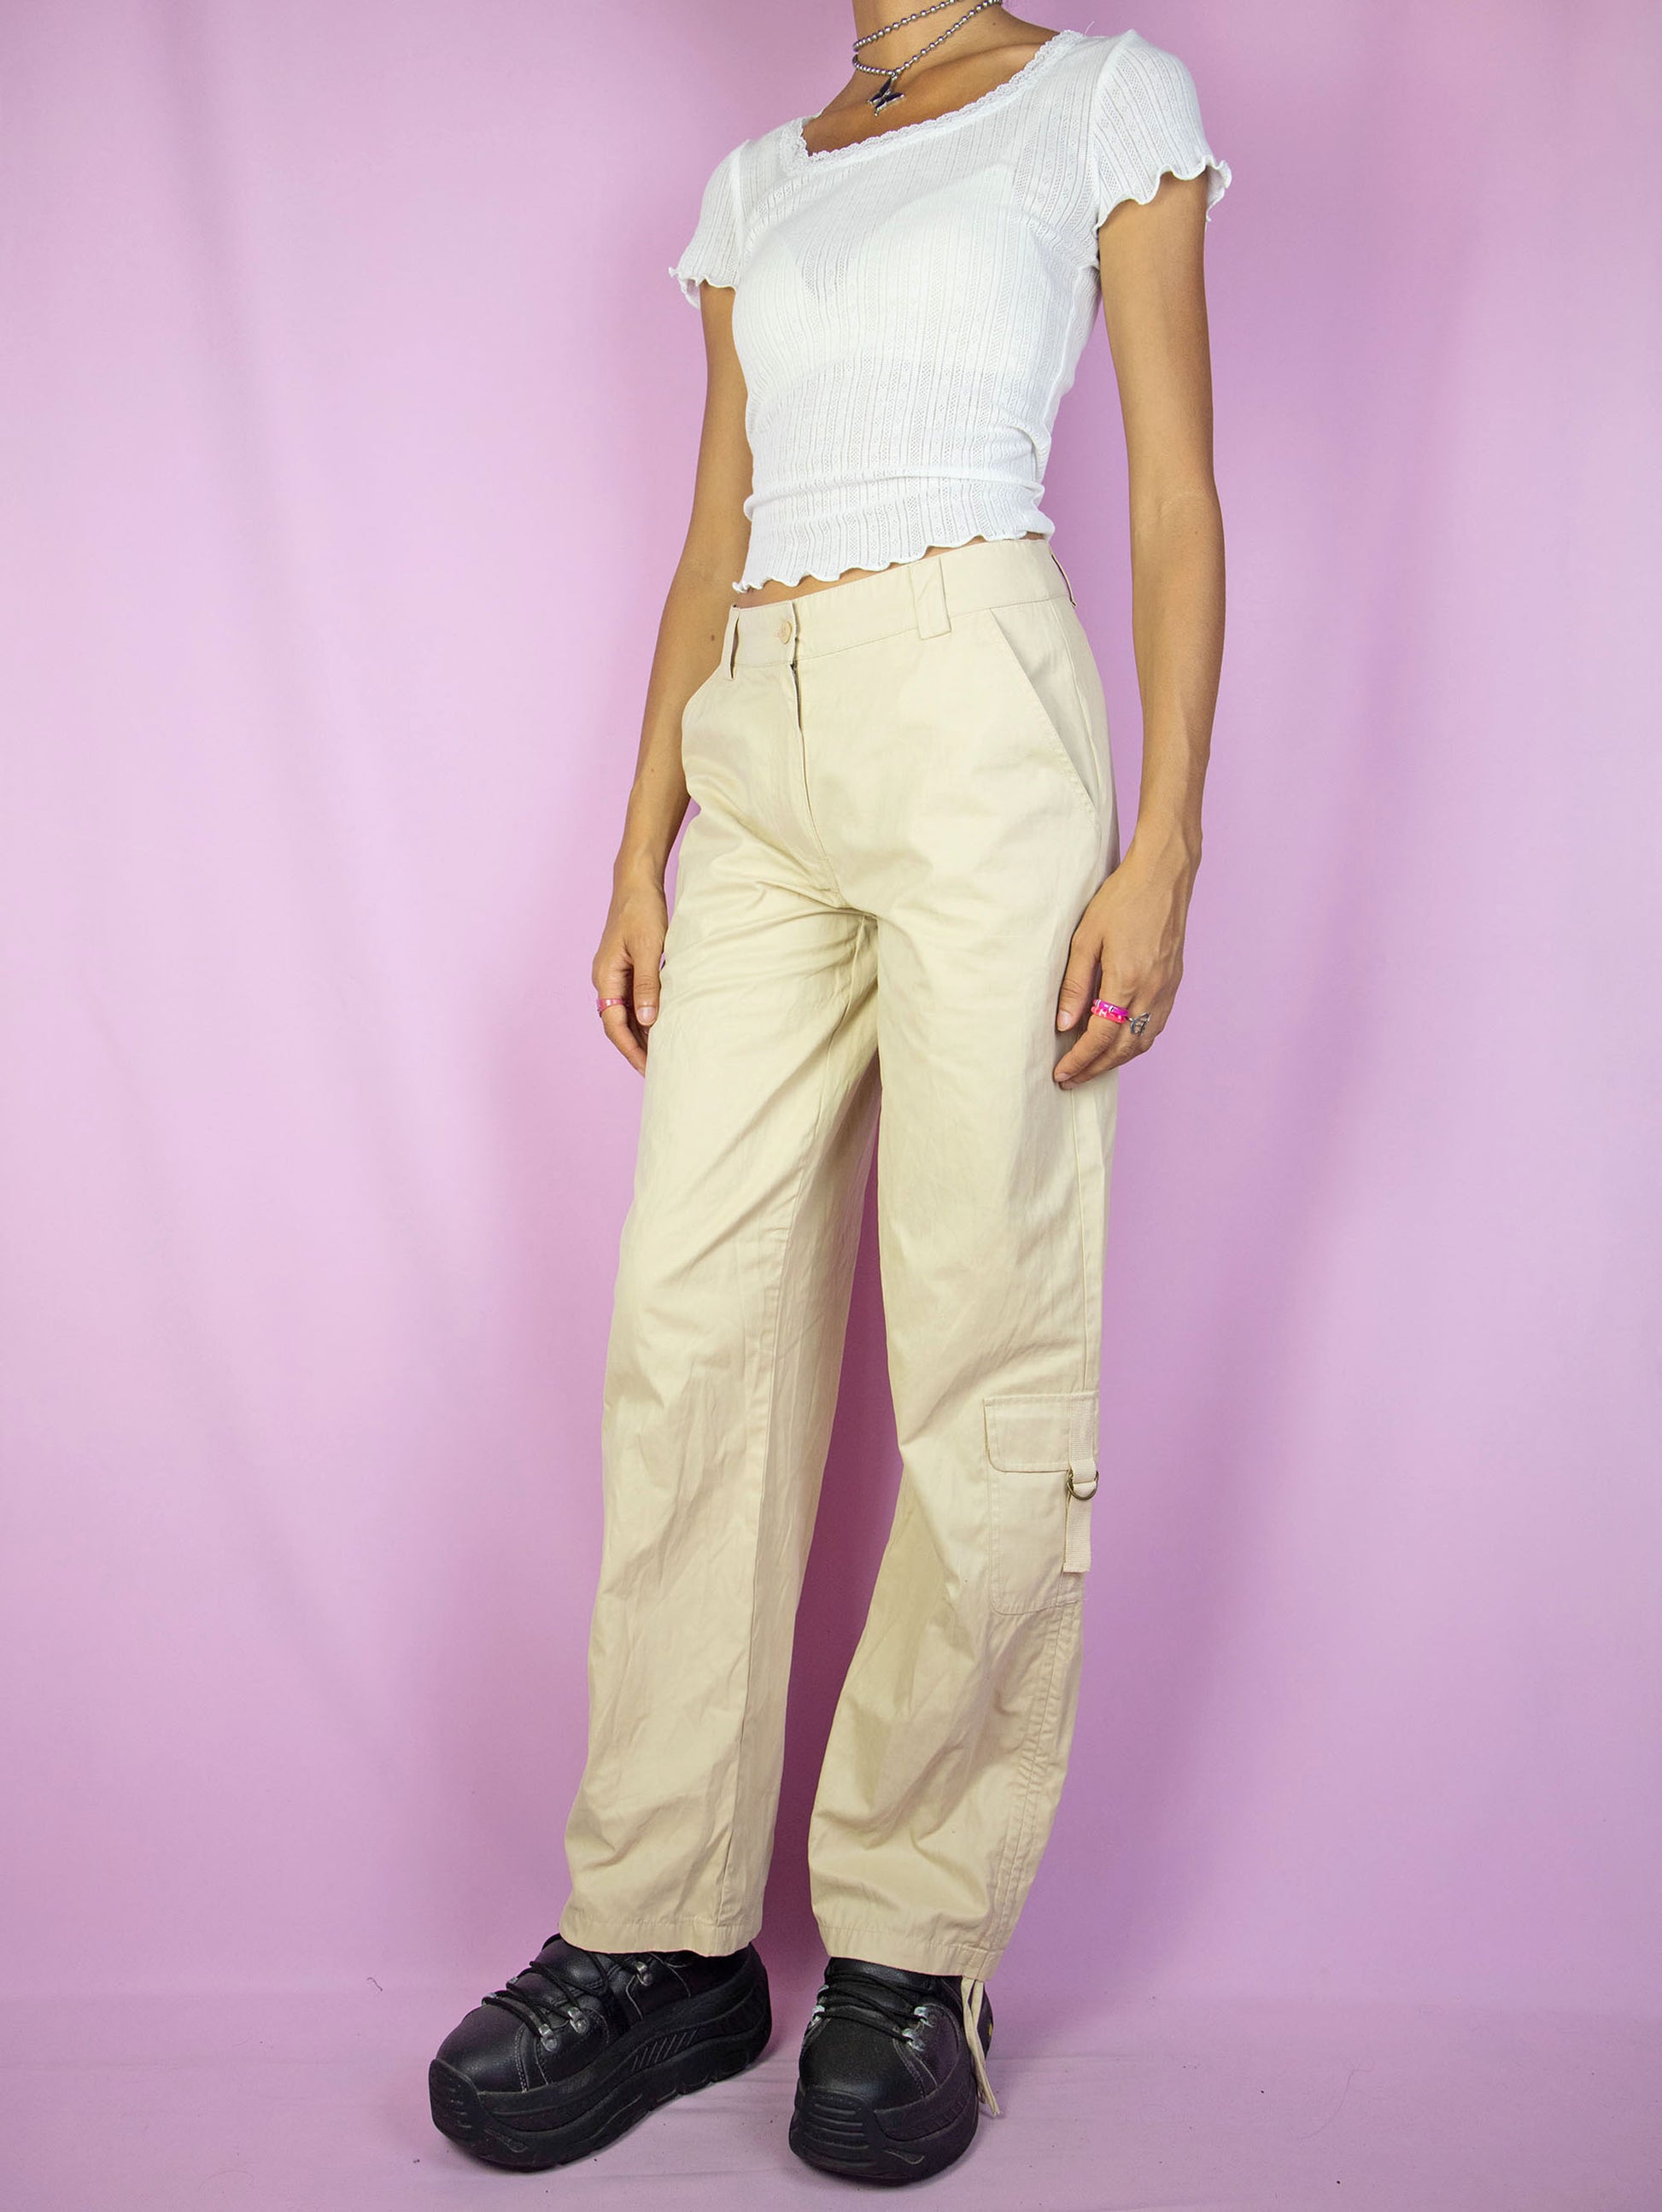 The Y2K Beige Cargo Pants are vintage mid-rise wide pants with pockets and a front zipper closure. Cyber grunge 2000s utility trousers.